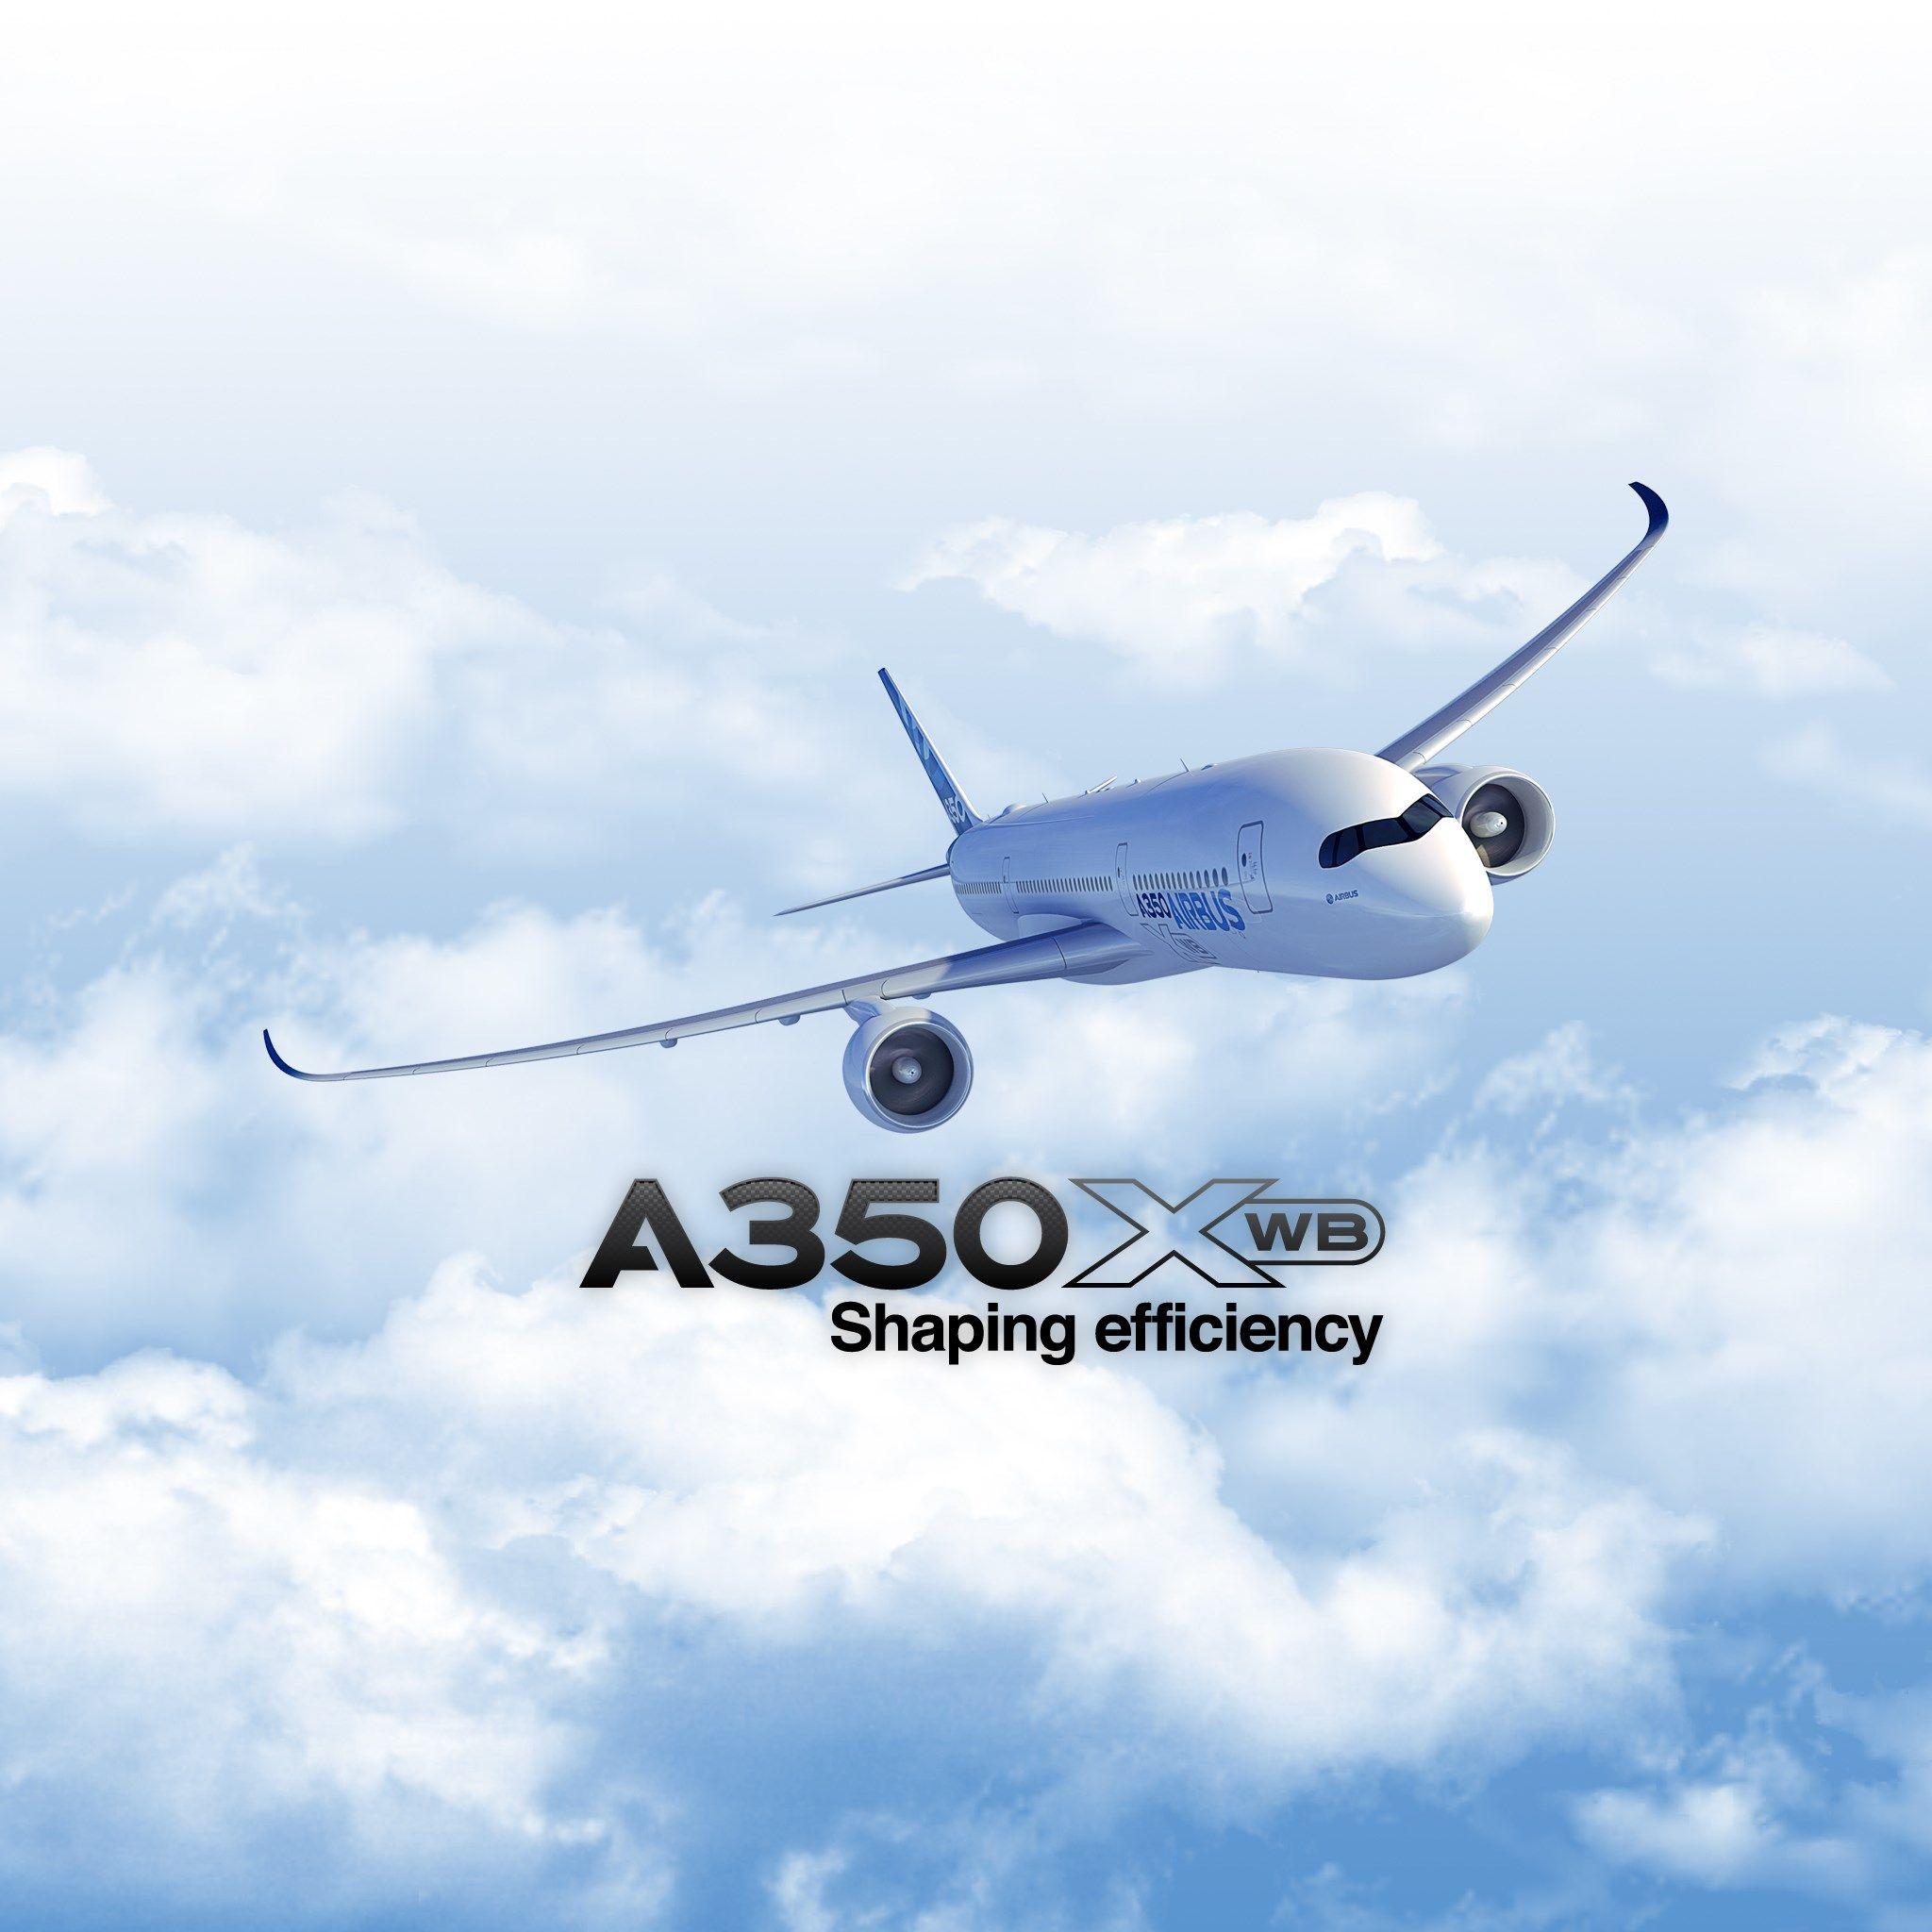 airbus a350 xwb wallpaper Wallppapers Gallery